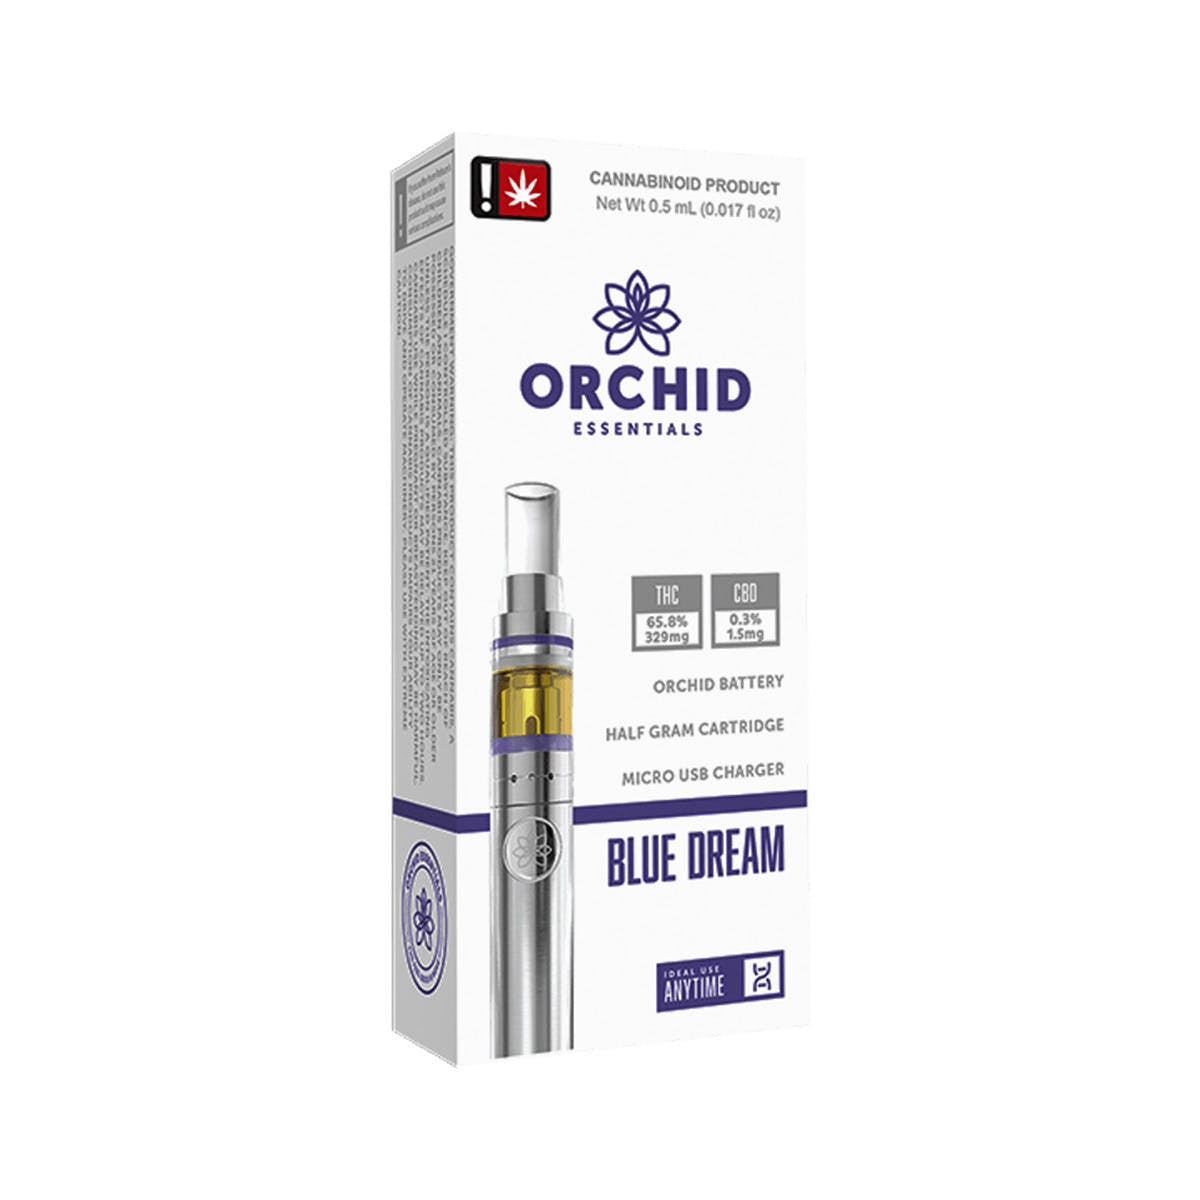 concentrate-orchid-essentials-blue-dream-5g-kit